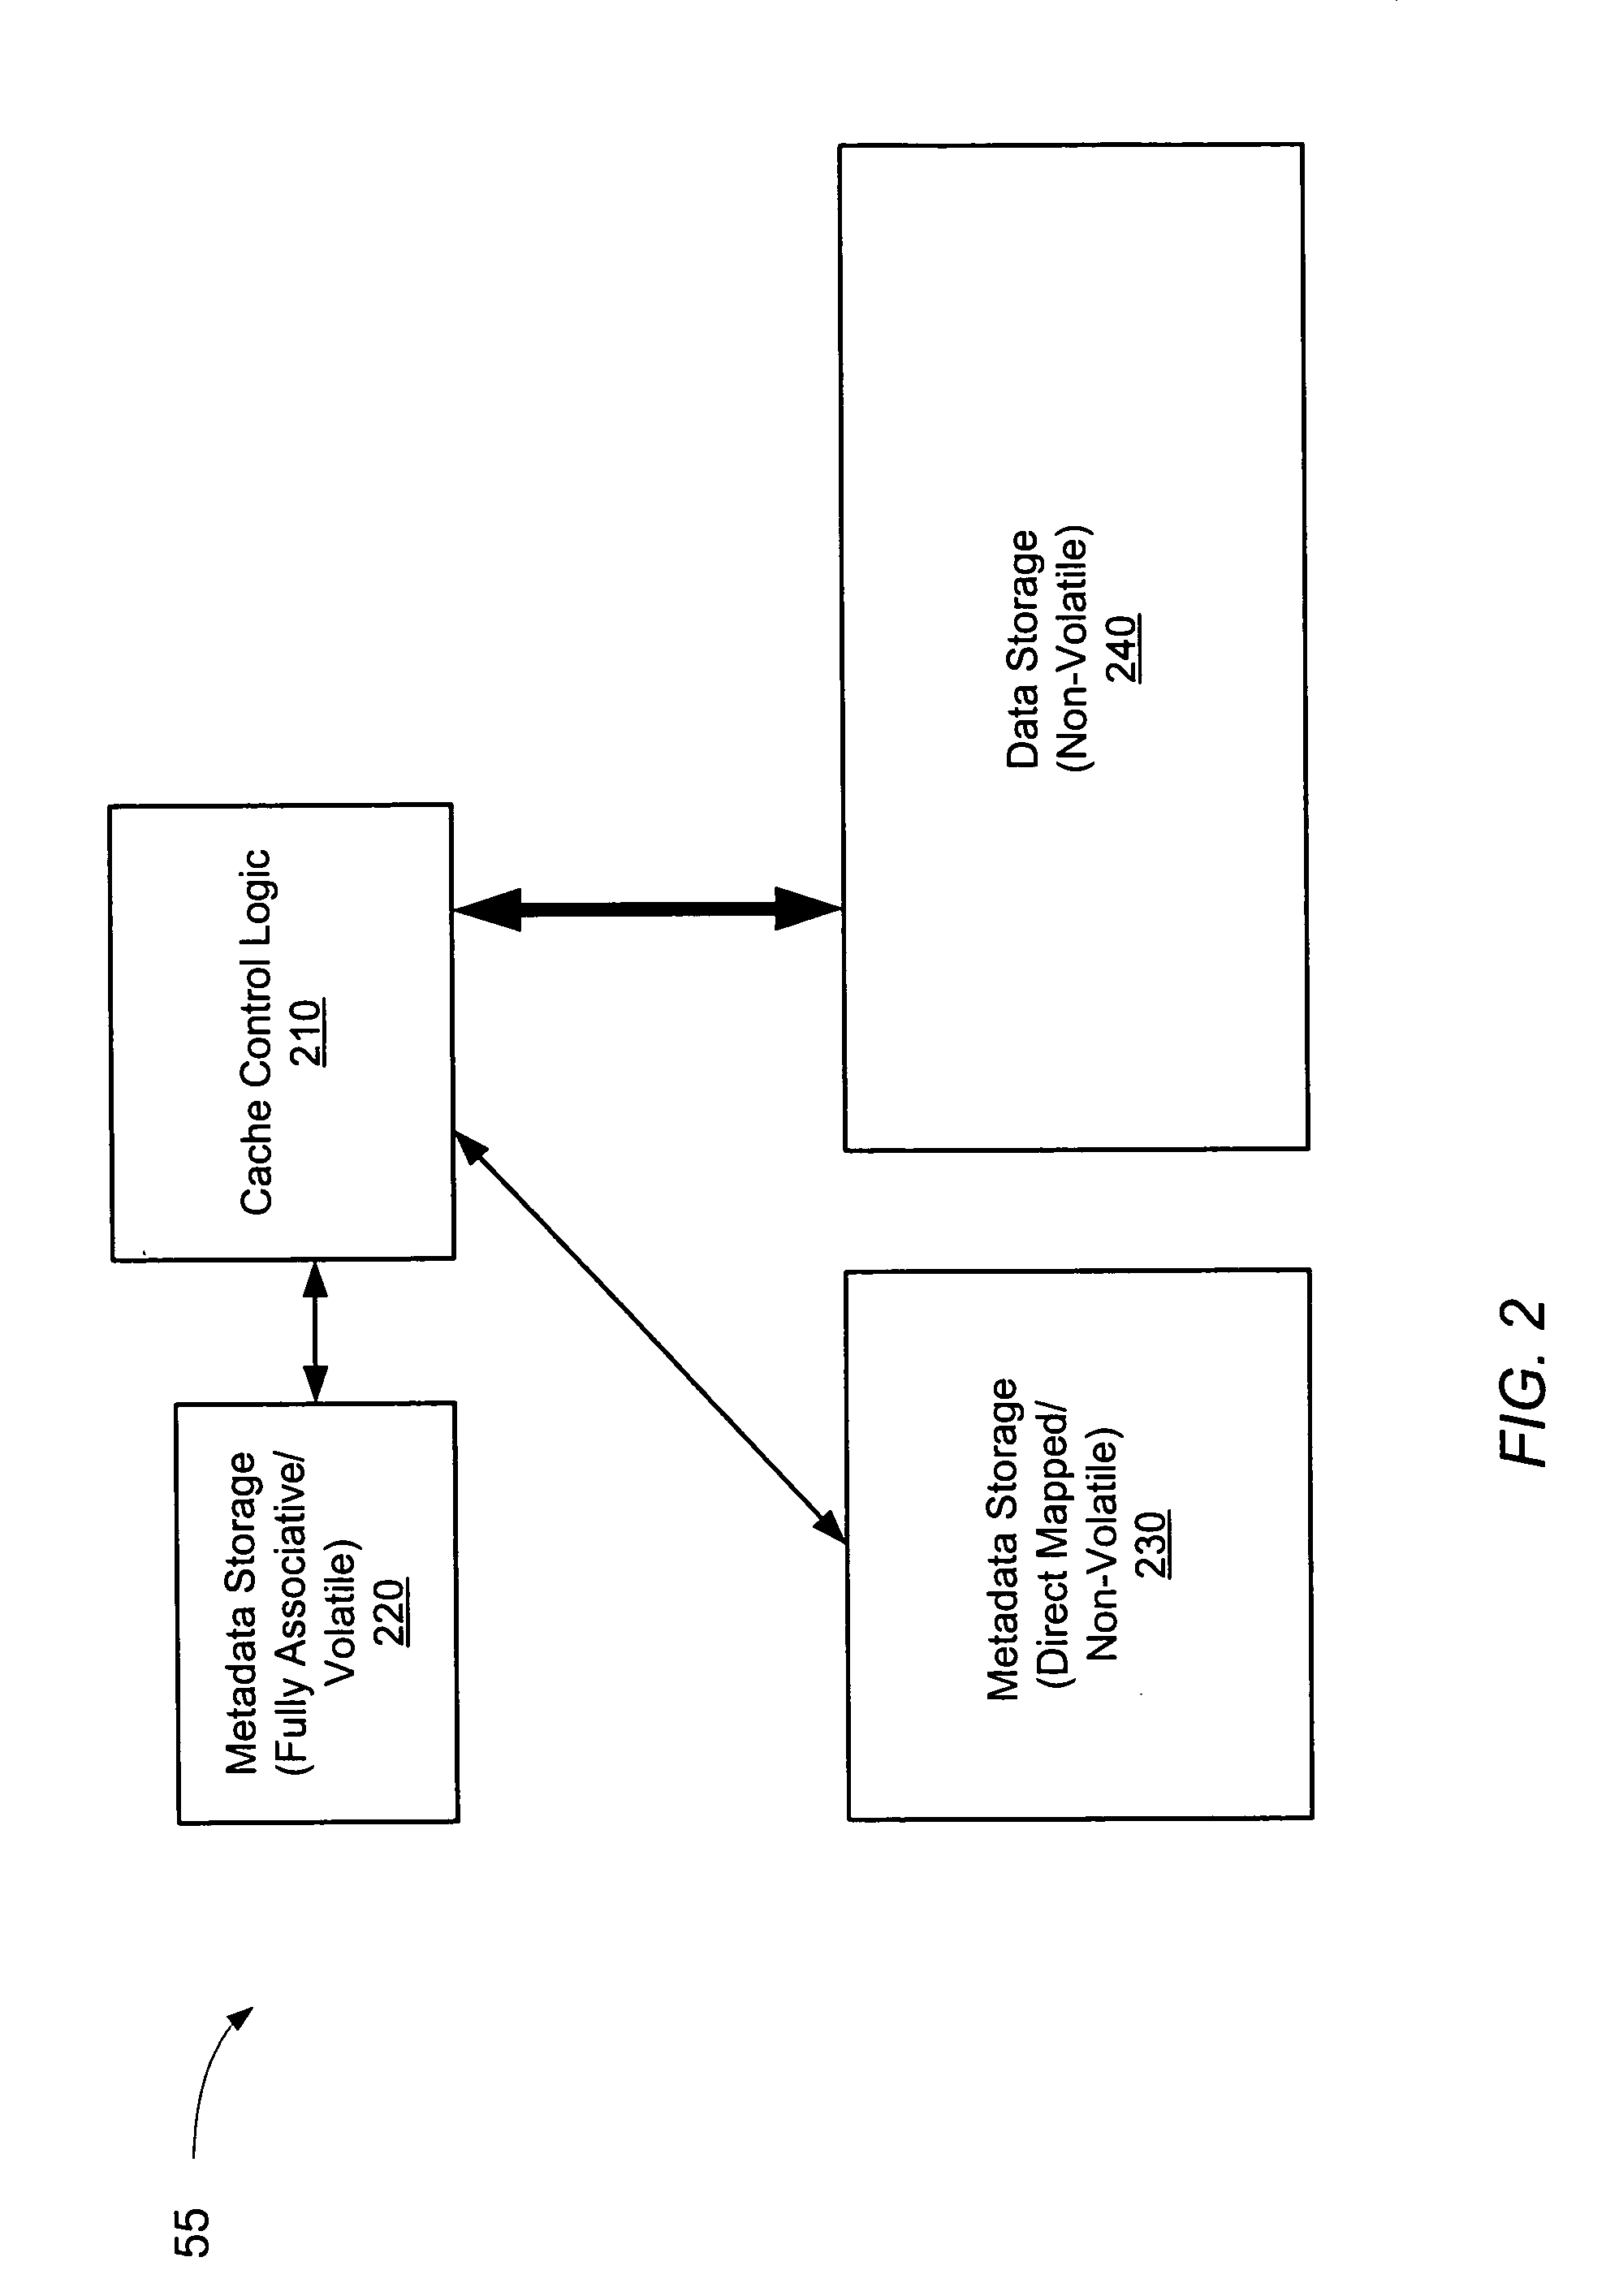 Storage system structure for storing relational cache metadata